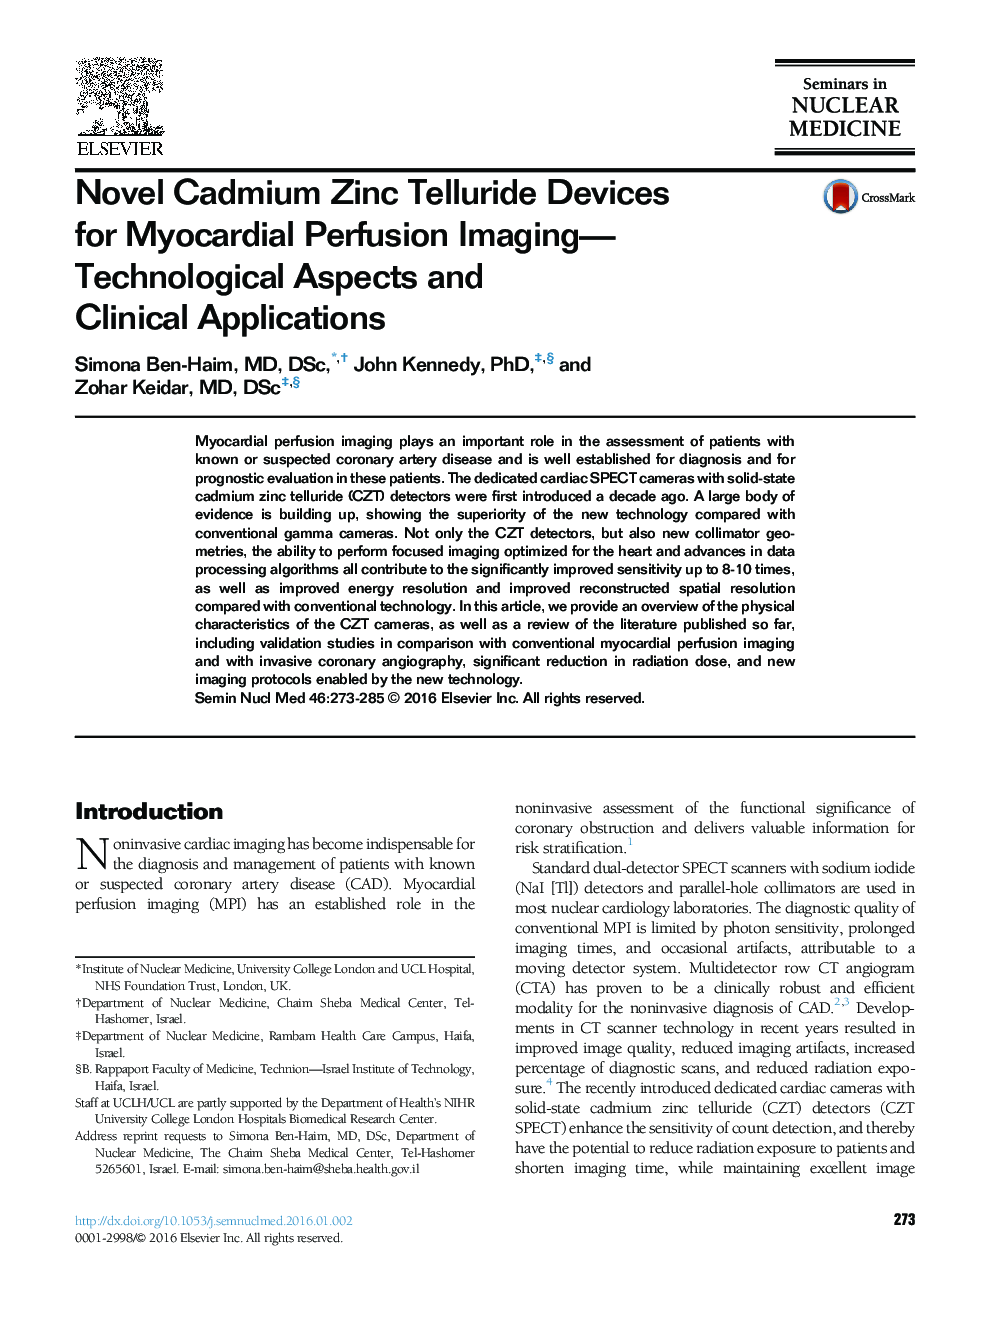 Novel Cadmium Zinc Telluride Devices for Myocardial Perfusion Imaging-Technological Aspects and Clinical Applications